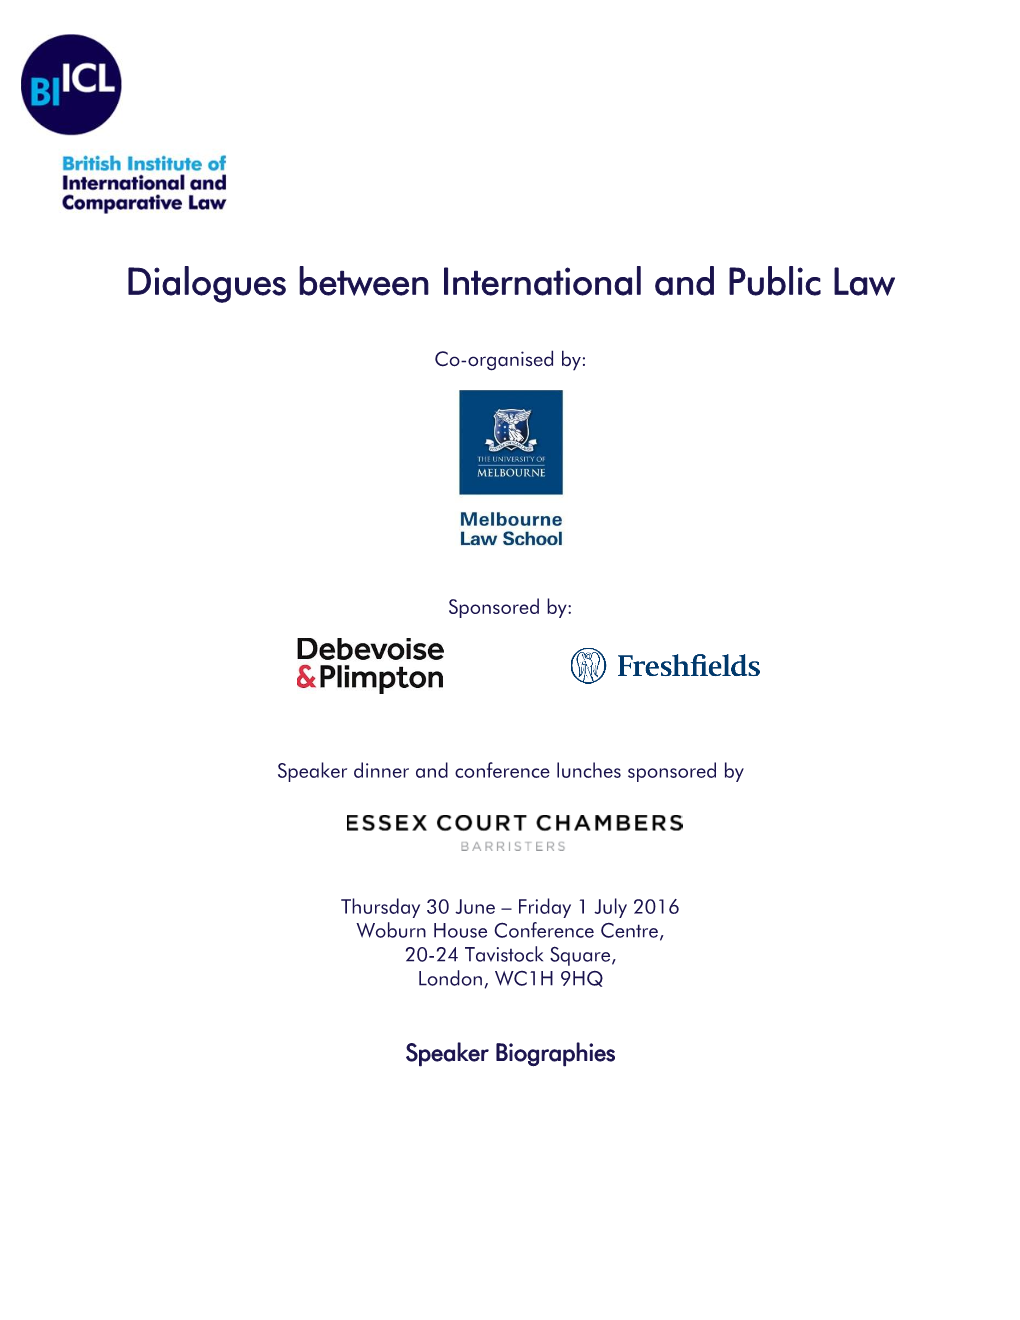 Dialogues Between International and Public Law